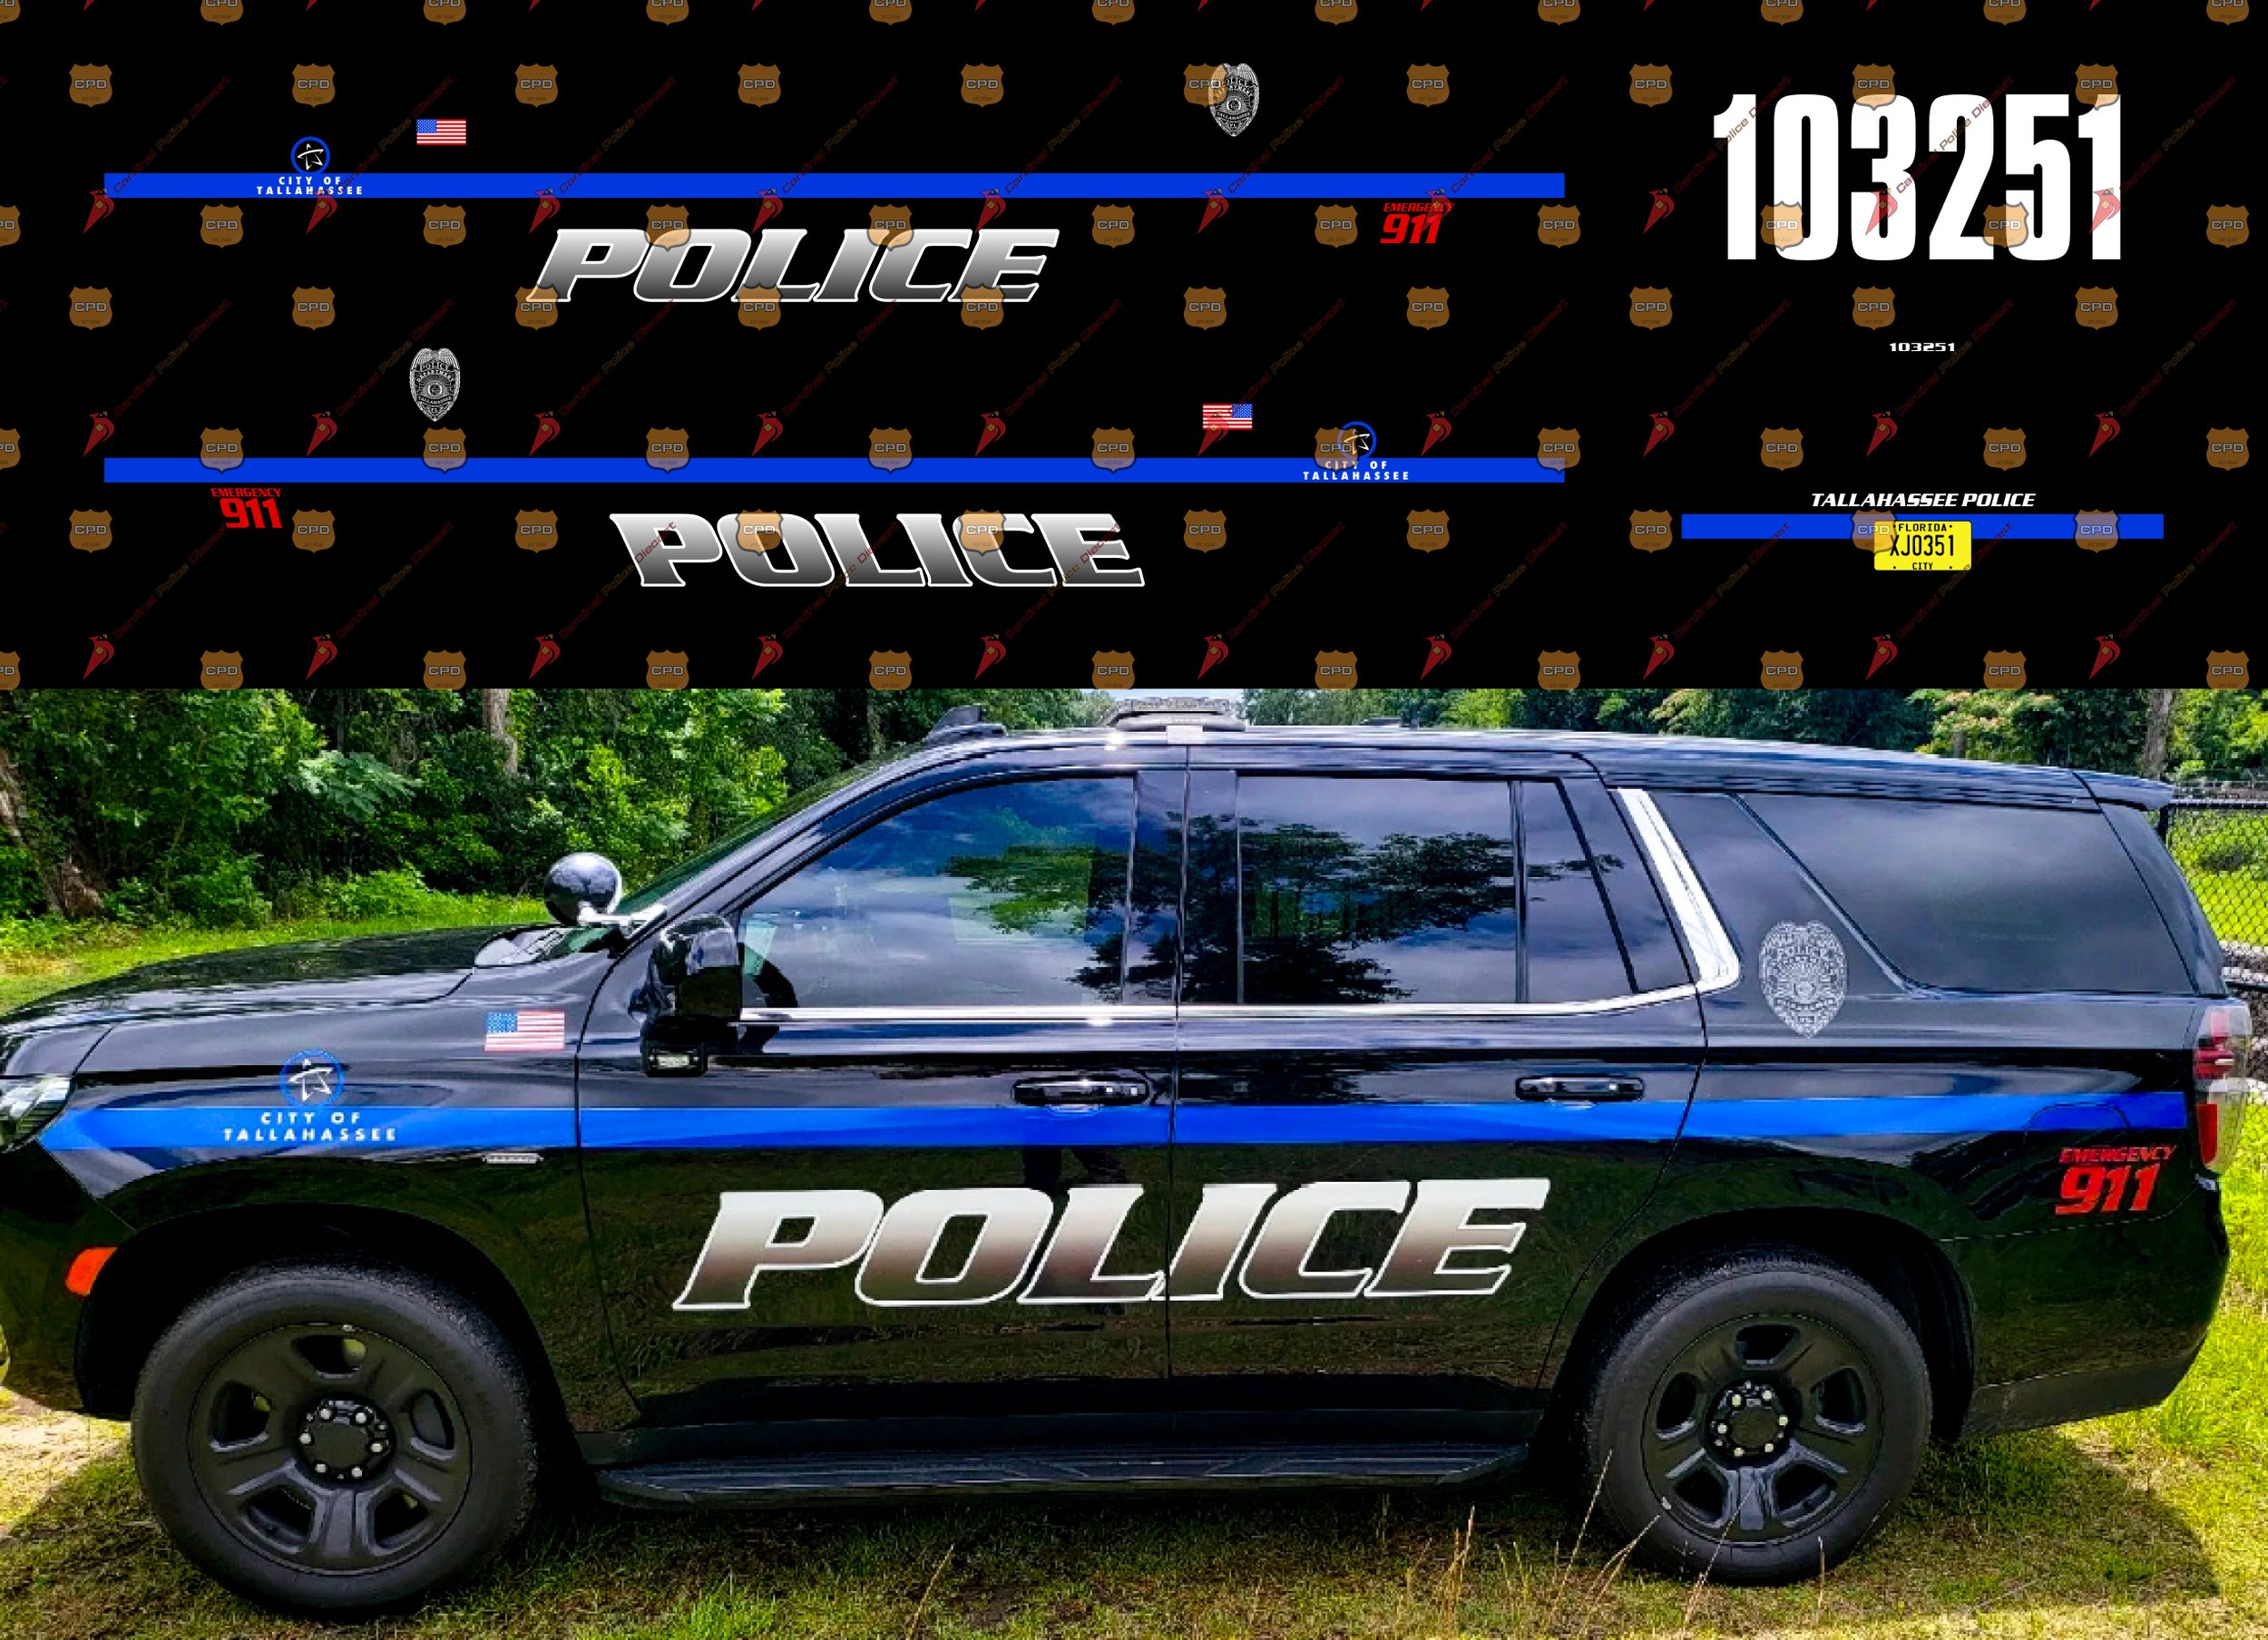 Police Car Graphics Kit, Featuring the “Swoosh” Design